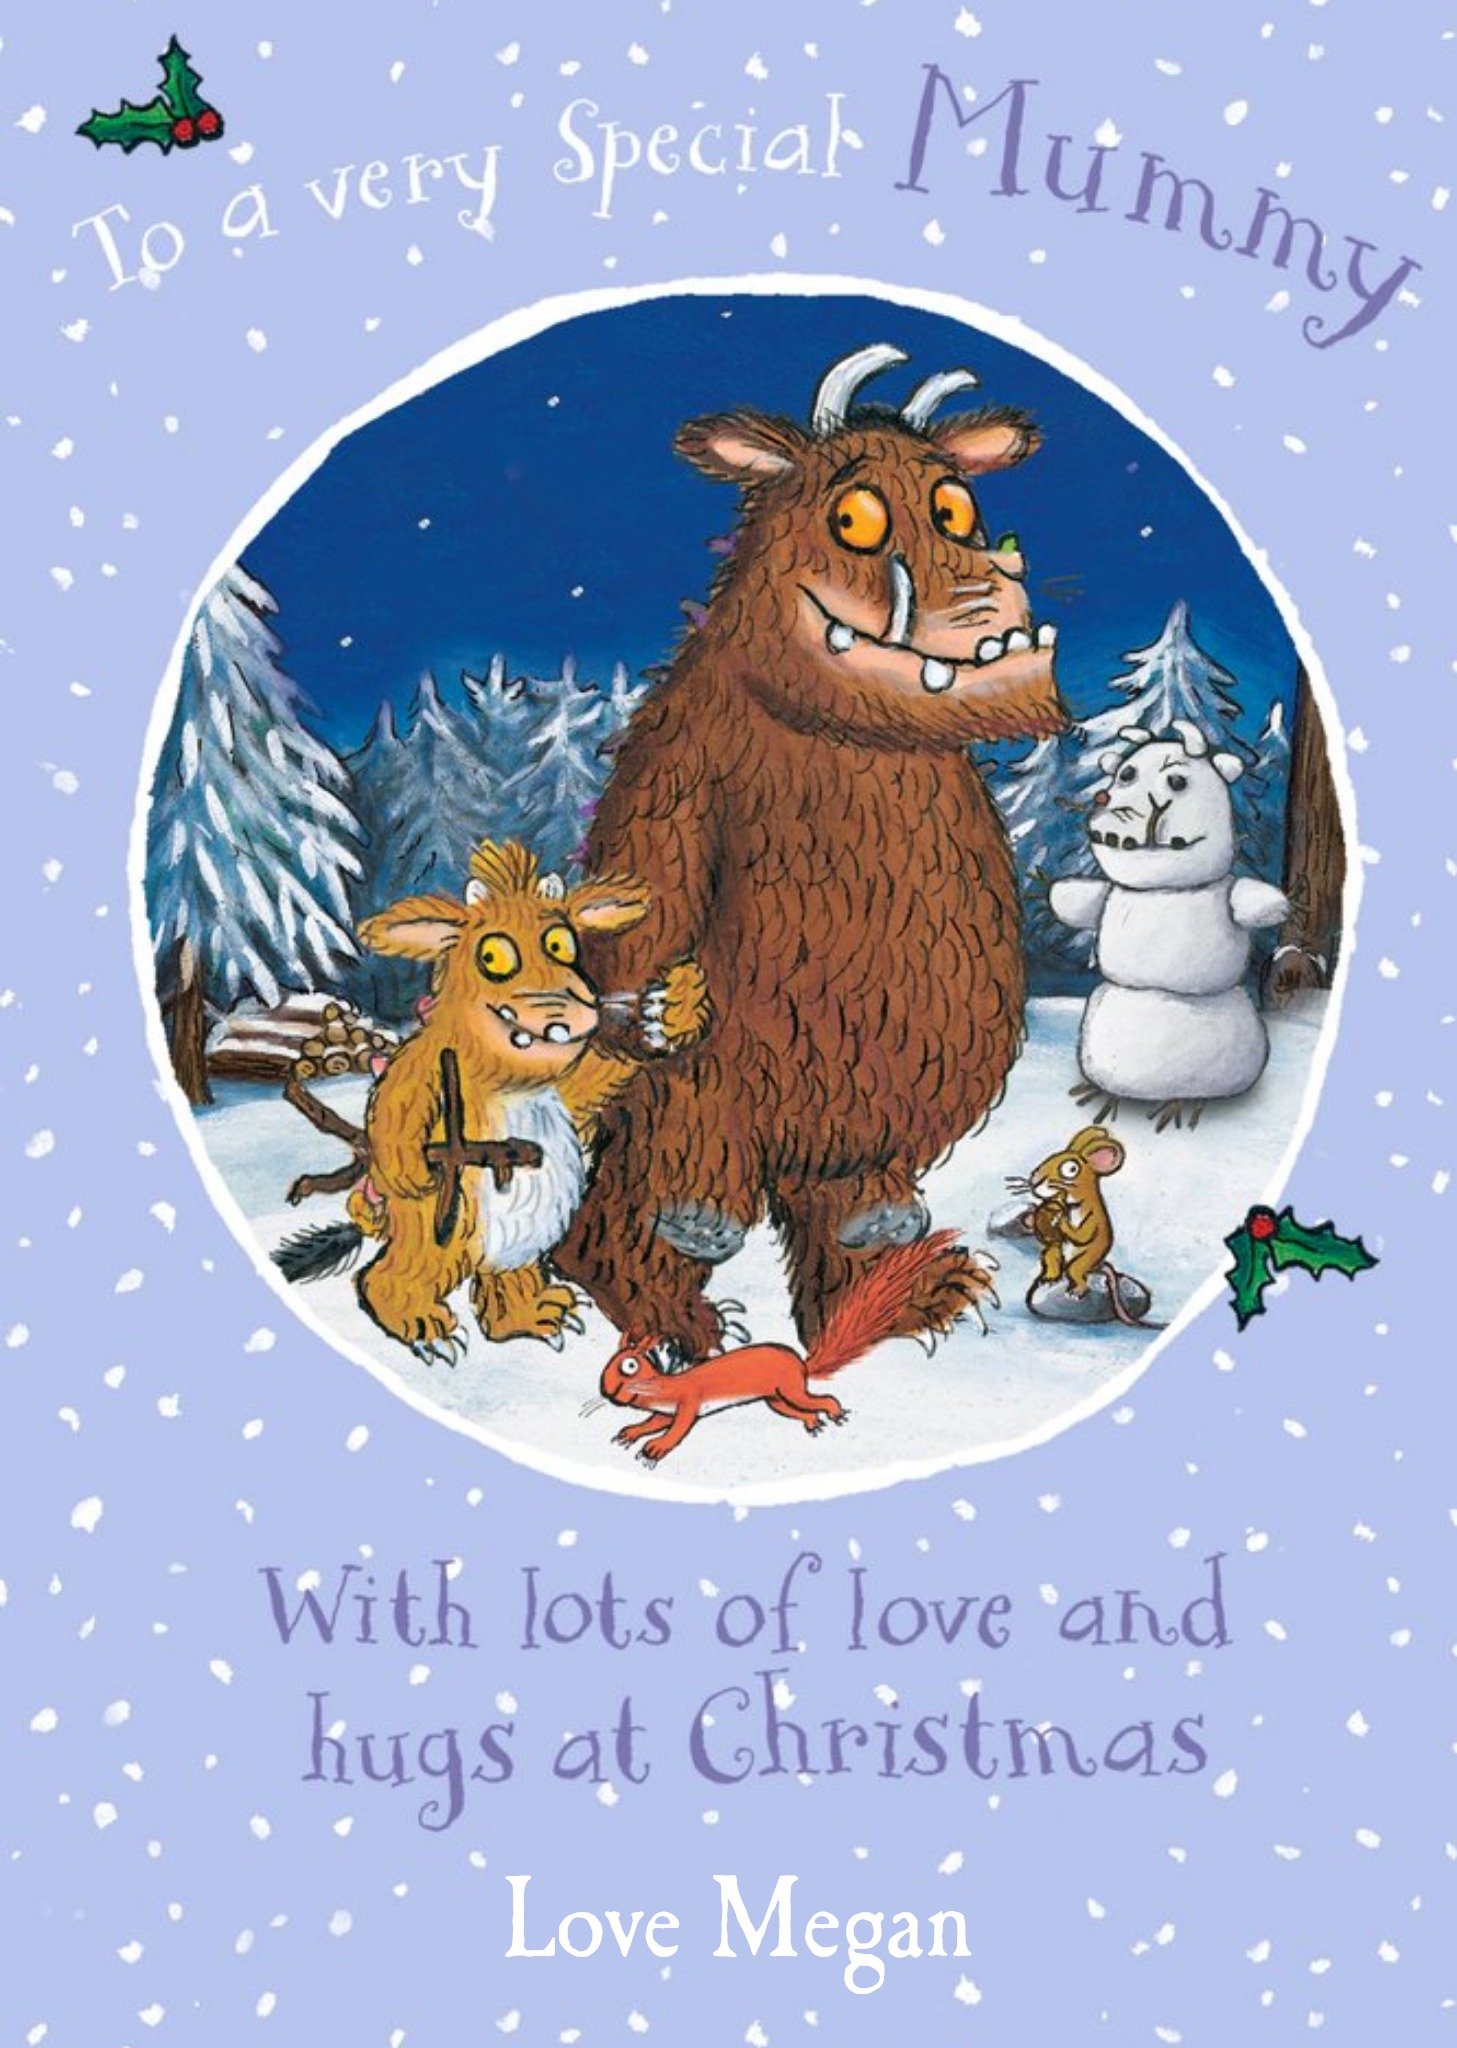 The Gruffalo's Child Very Special Monday Christmas Card, Large